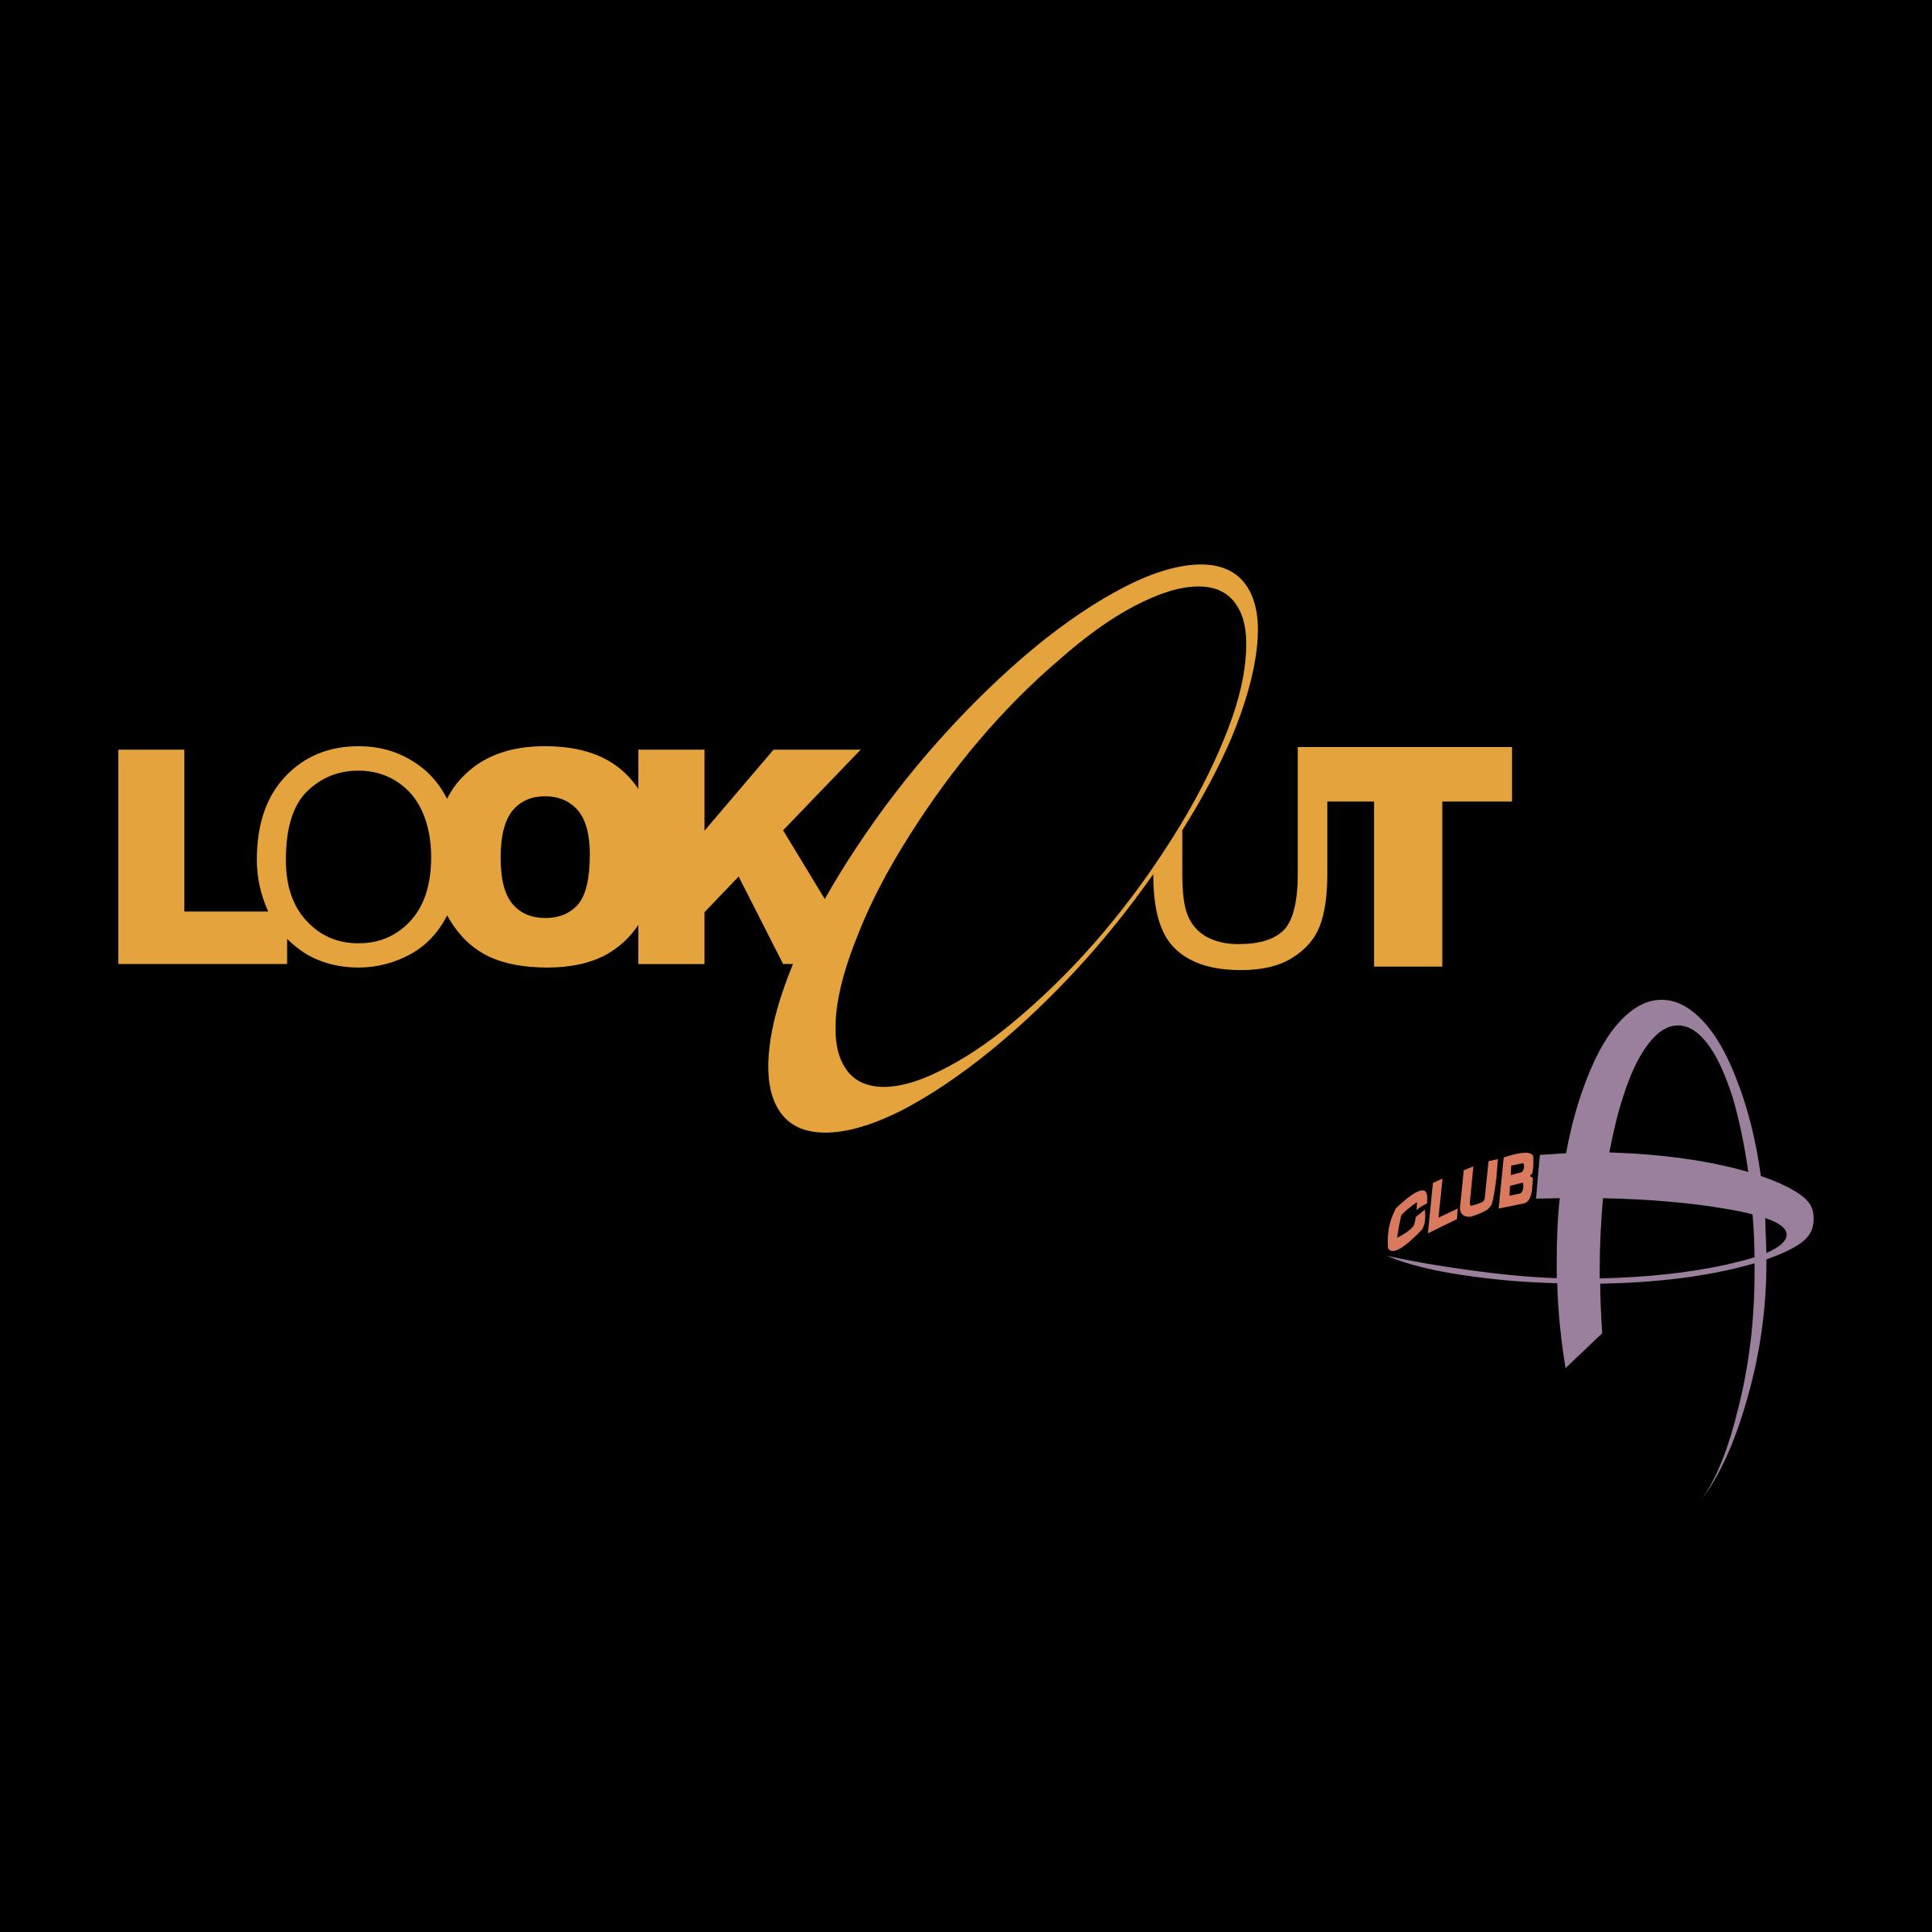 Lookout Logo - The LookOut & Club Logo PNG Transparent & SVG Vector - Freebie Supply